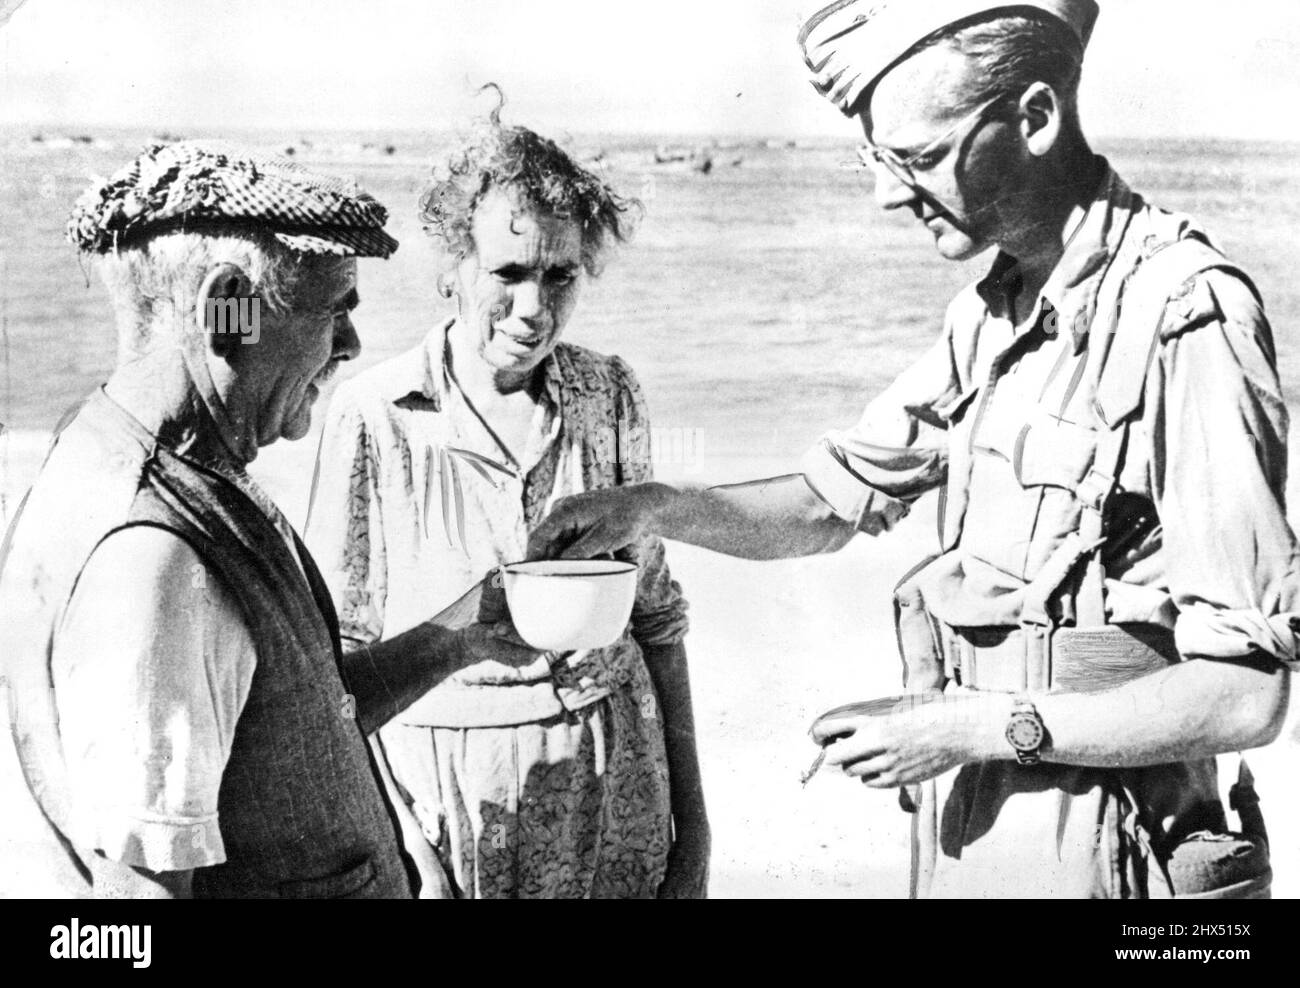 Allied Officer Takes Tea With Italian Residents An Allied officer accepts a mug of tea form residents of Reggio Calabria shortly after the arrival of the British Eighth Army on the Italian mainland. Reggio the Allied forces after their crossing of the strait of Messina form Sicily. November 01, 1943. (Photo by U.S Office Of War Information Picture). Stock Photo